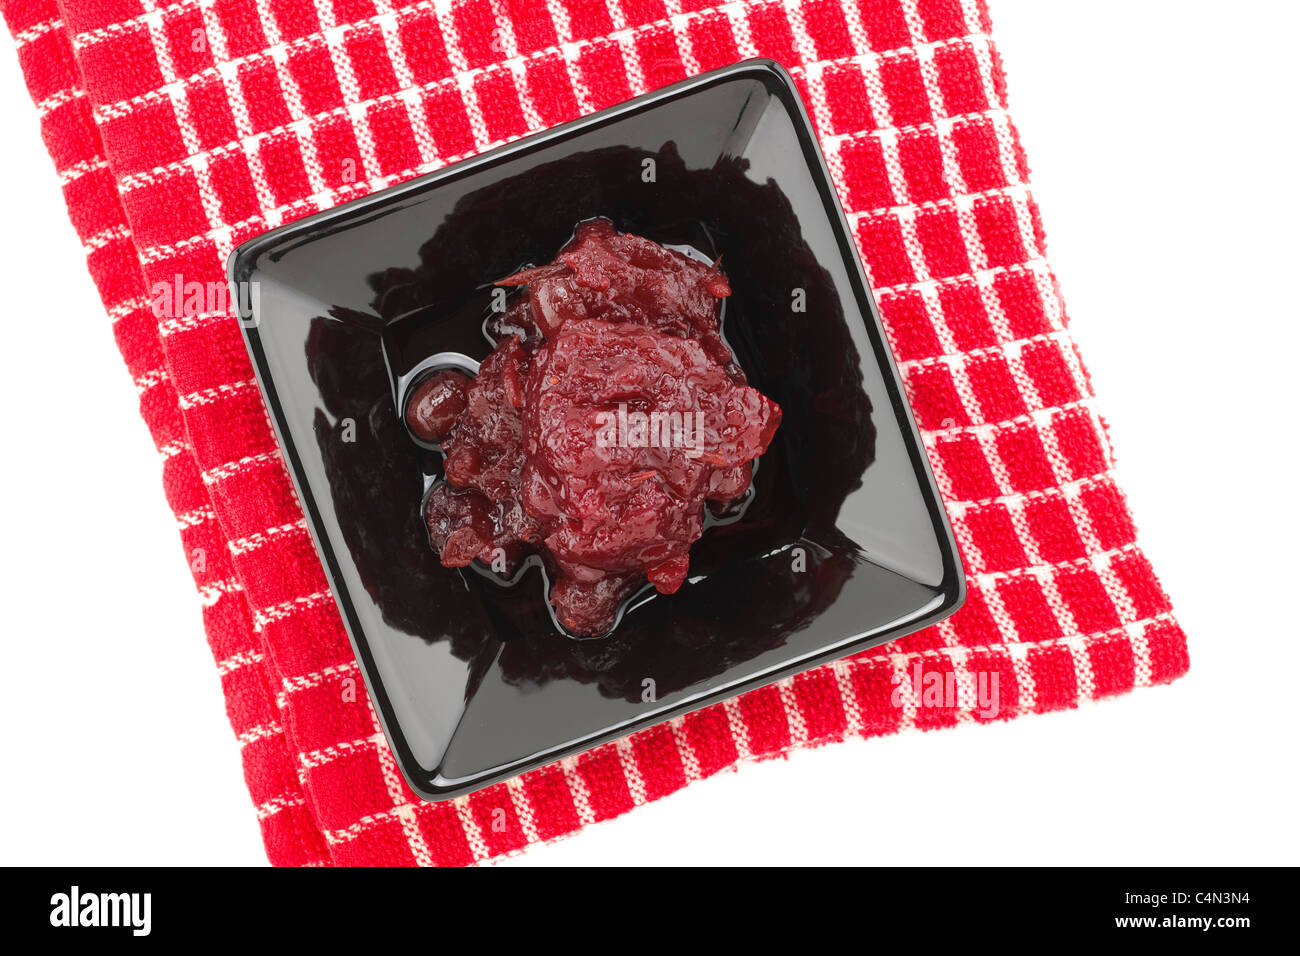 Cranberry sauce in a black serving dish placed on a red and white teatowel Stock Photo